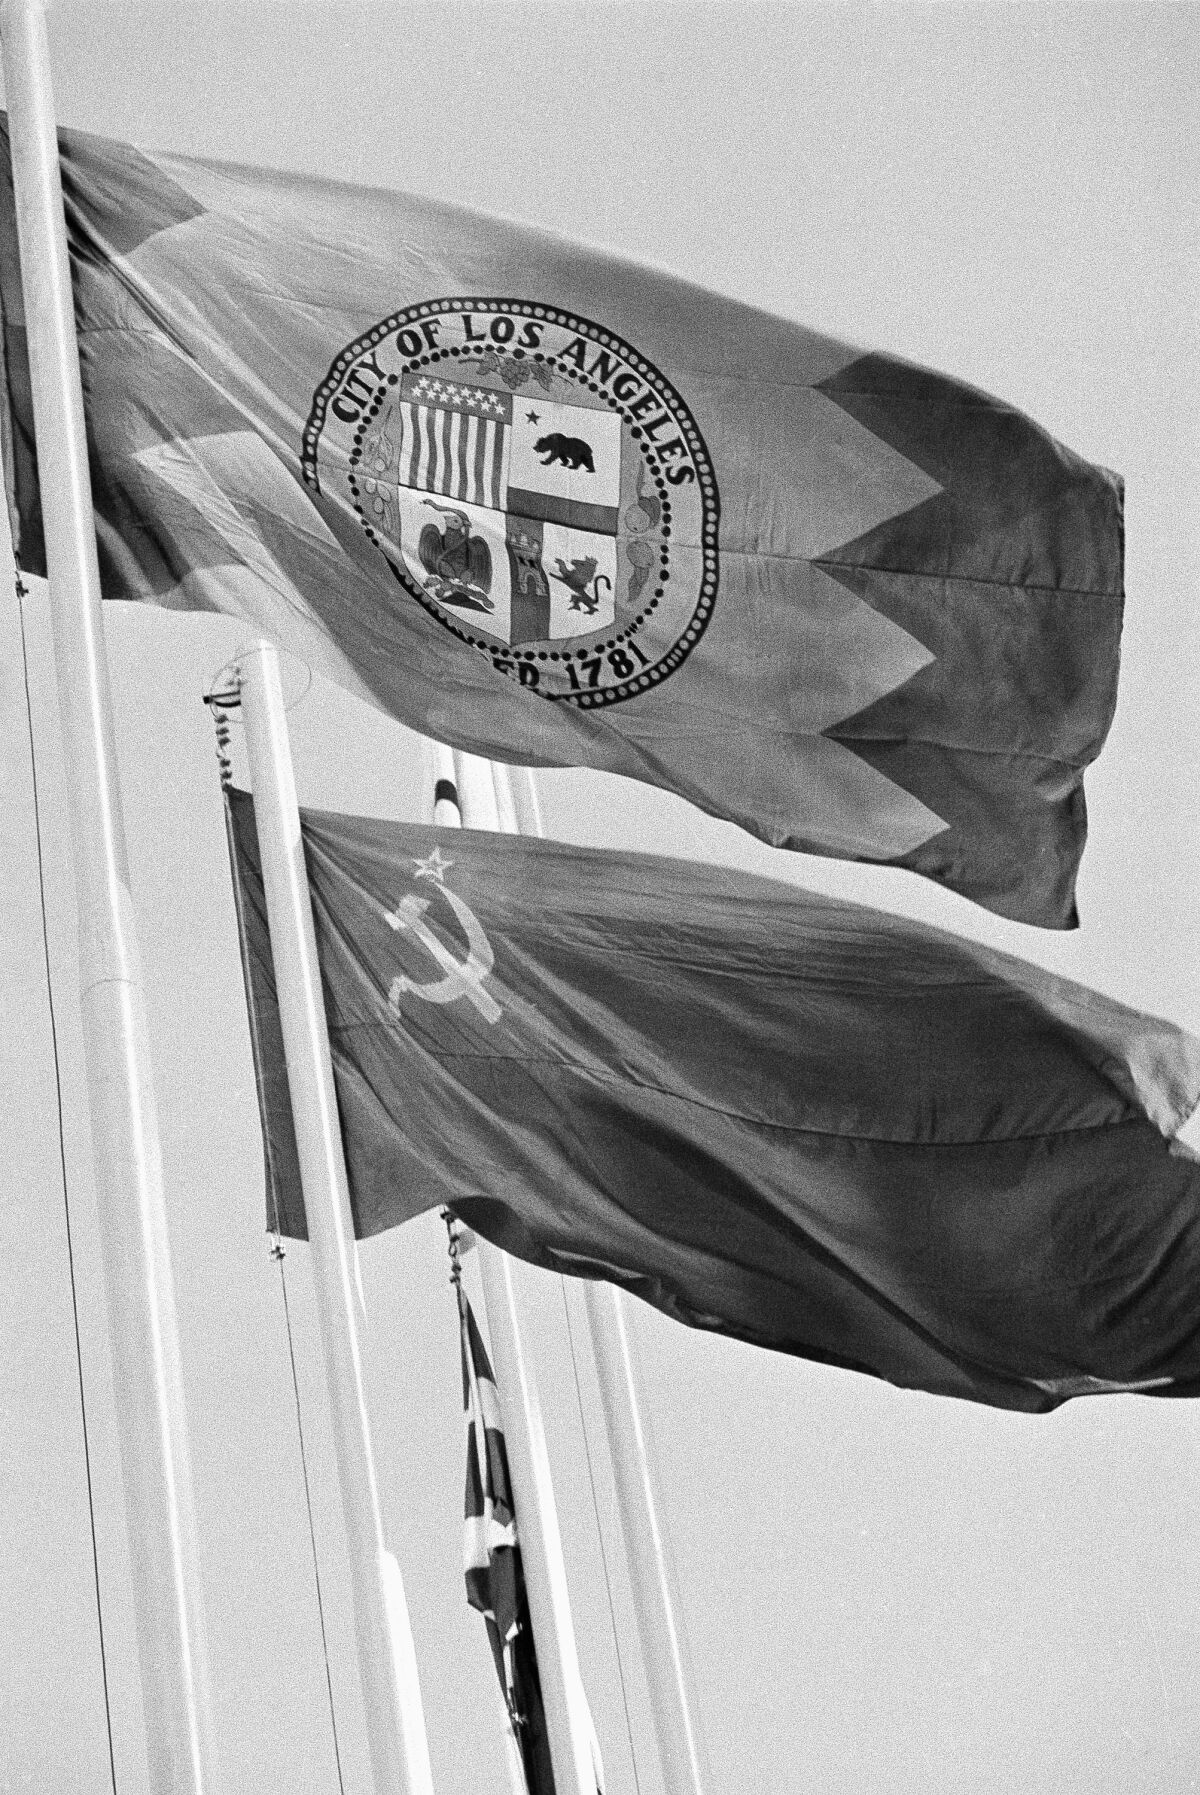 The Los Angeles city flag flies next to the Soviet Union's during the closing ceremony of the 1980 Moscow Olympics.